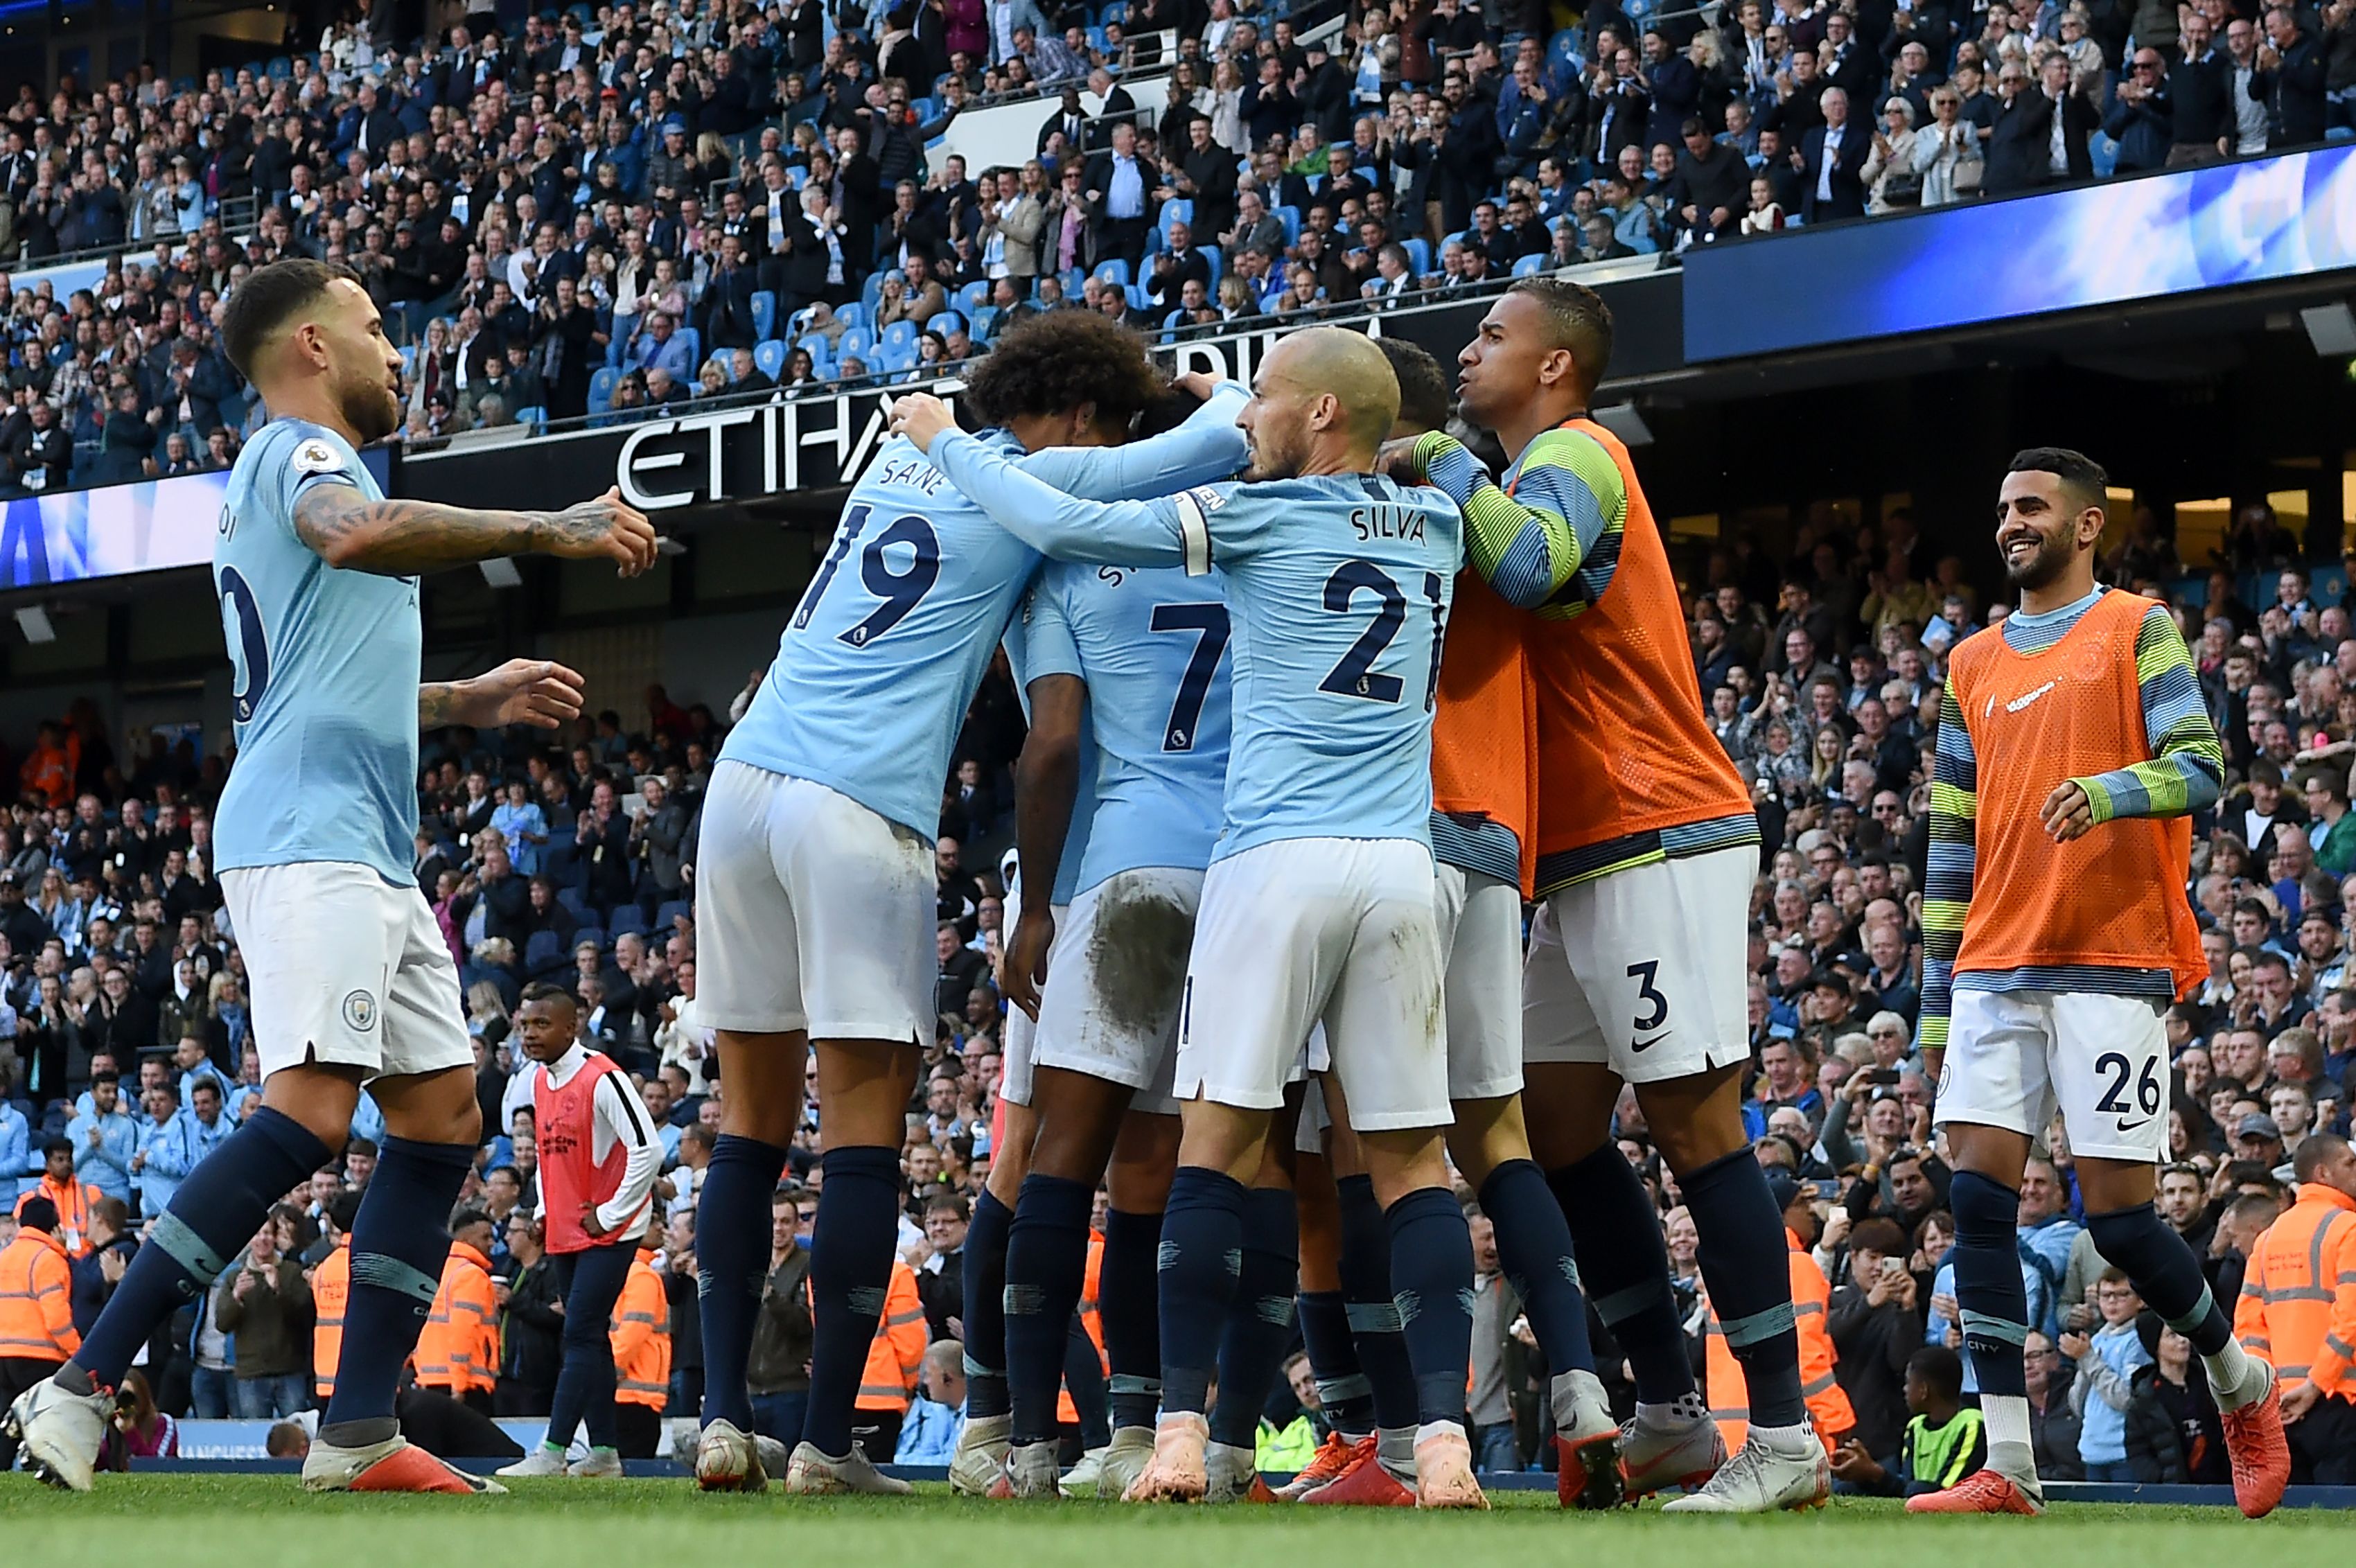 Manchester City have returned to the top of the table, but the competition this time is much more fierce. (Photo by Paul Ellis/AFP/Getty Images)